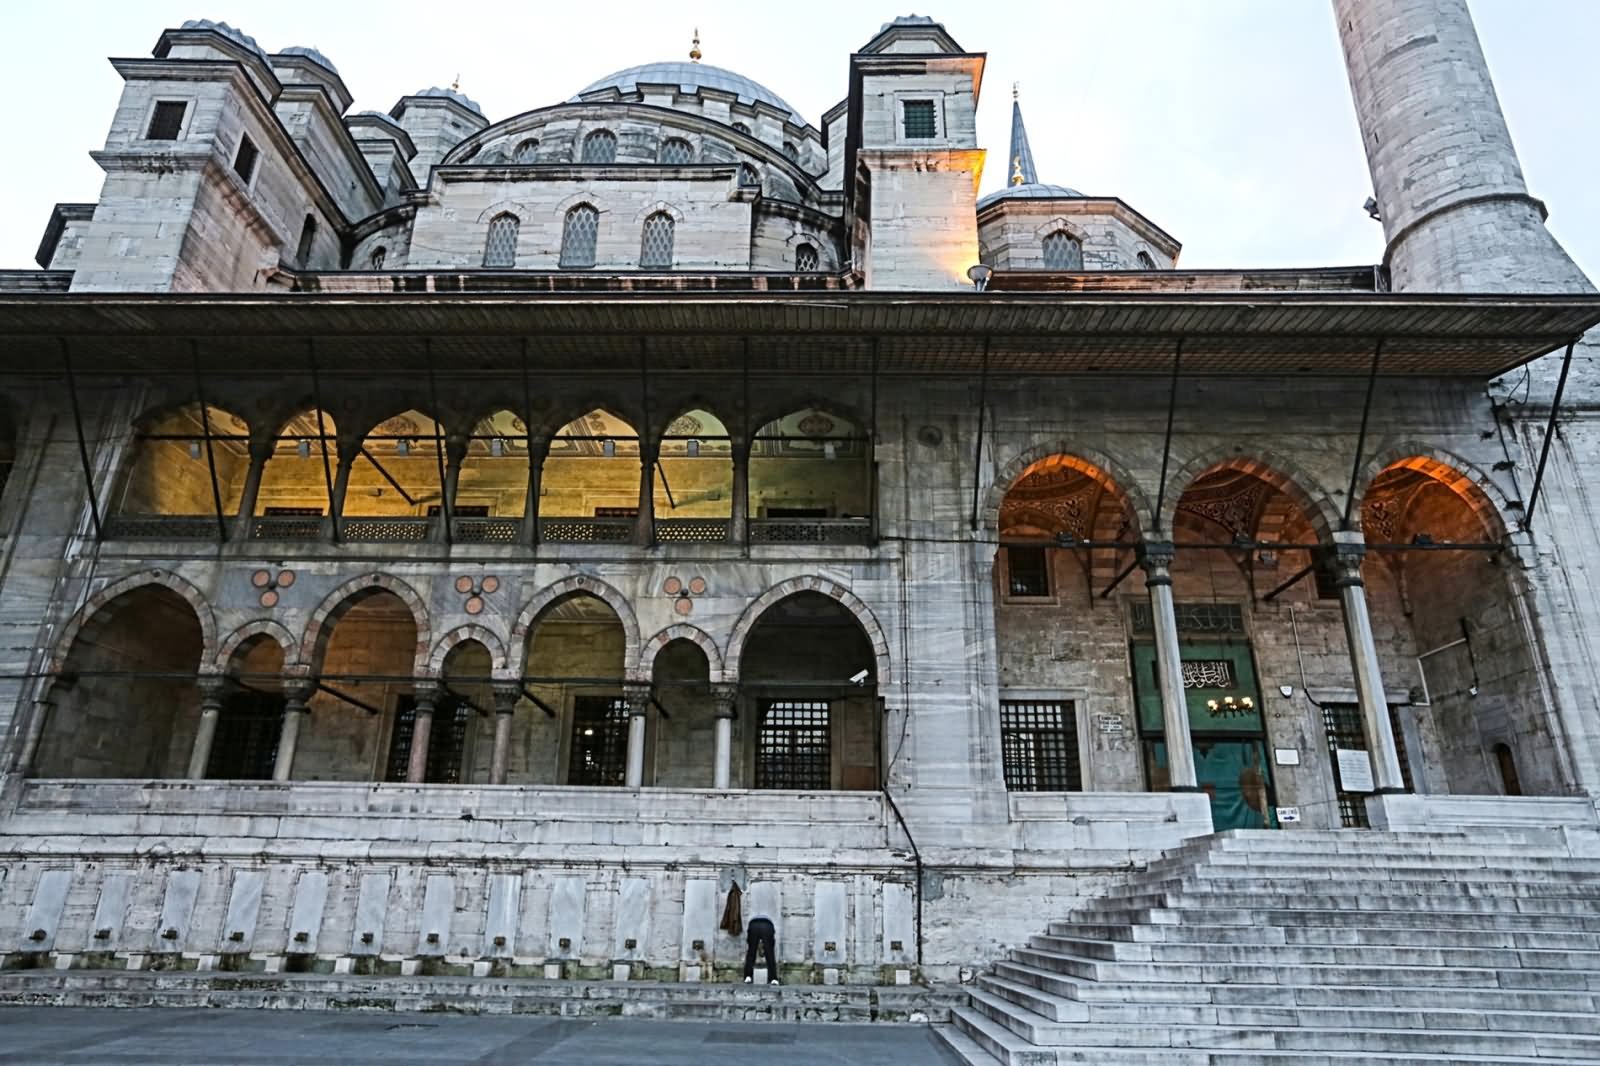 Yeni Cami Mosque Entrance View Image